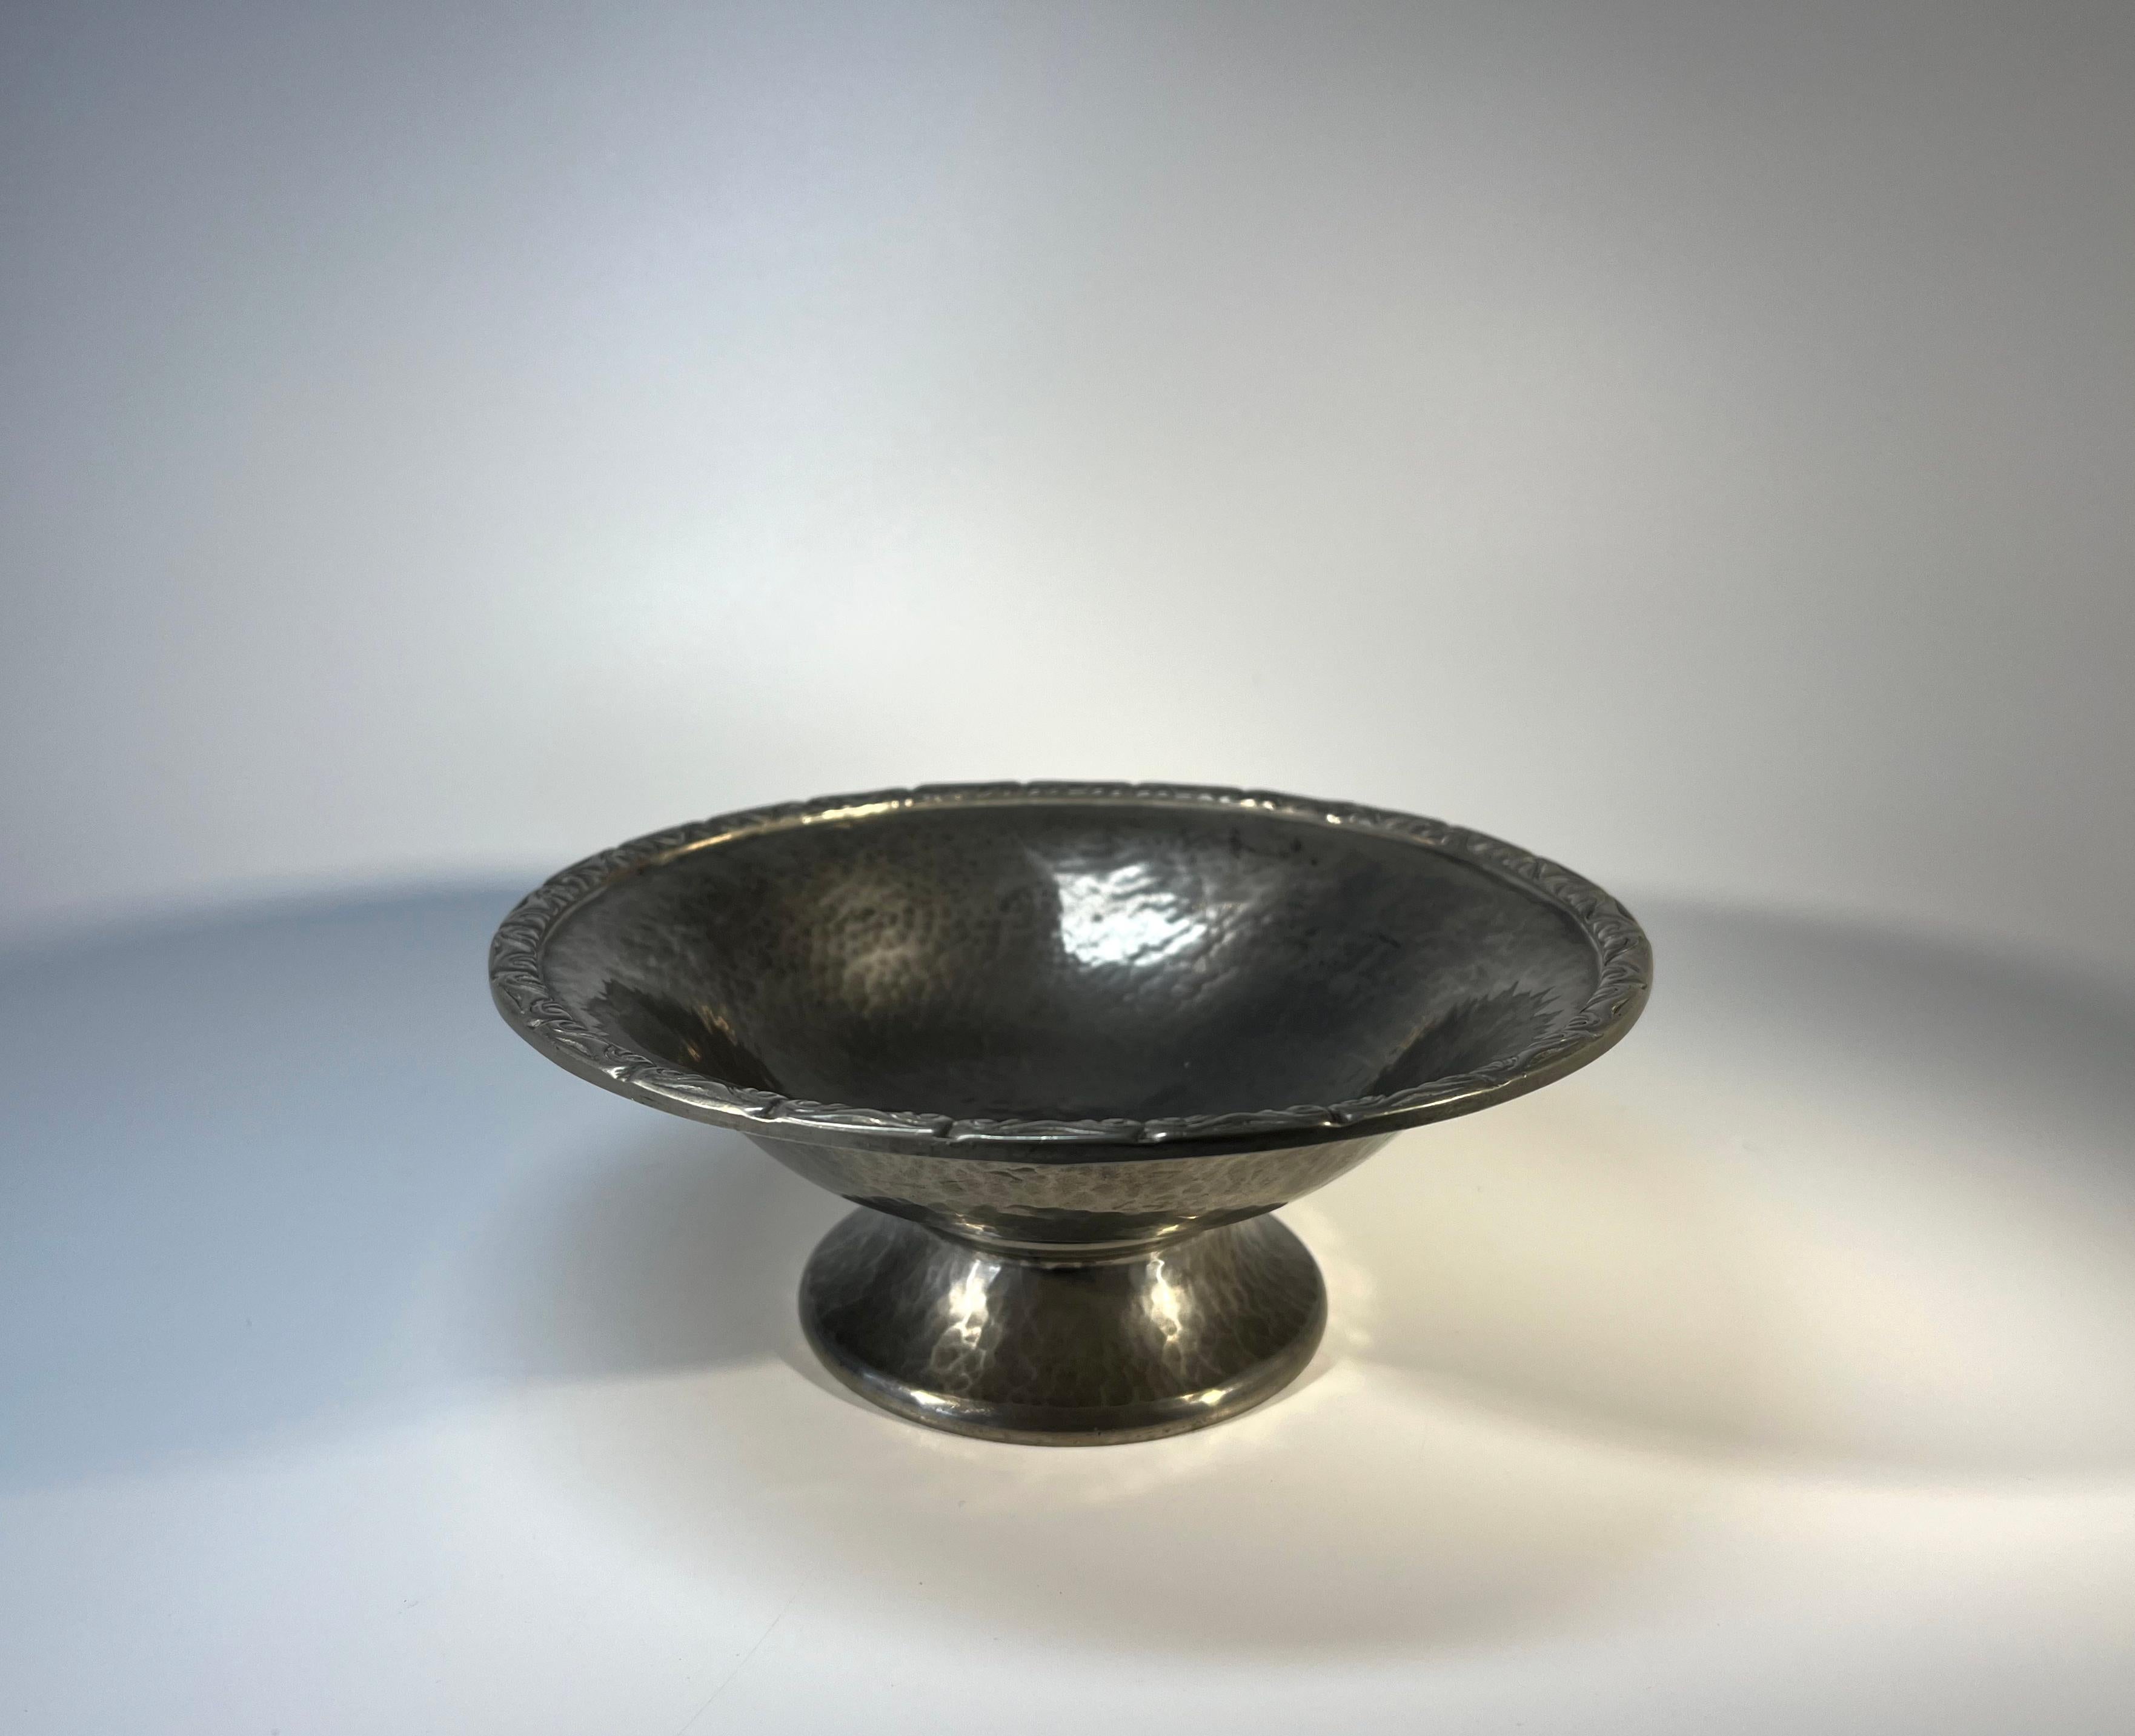 Art Nouveau antique pewter footed dish for Liberty & Co., Regent Street, London
Superb dark pewter patina and hand hammered with stylised edging decoration
Circa 1910
Signed English Pewter, Liberty & Co 01354 to base
Height 2.5 inch, Diameter 6.75